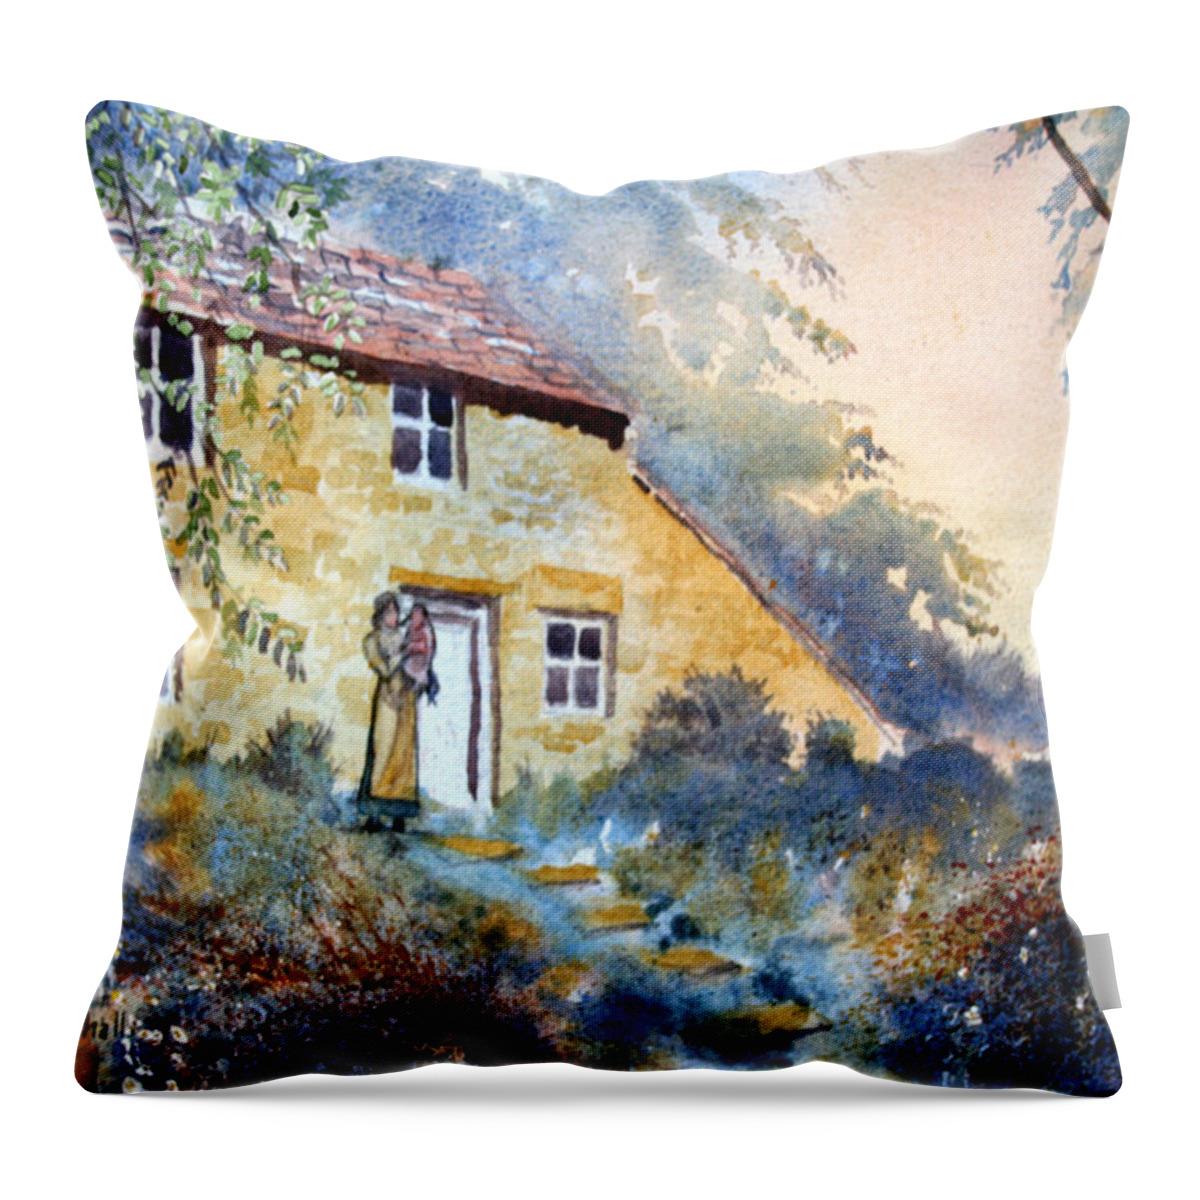 Landscape Throw Pillow featuring the painting The Dwelling at Hawnby by Glenn Marshall